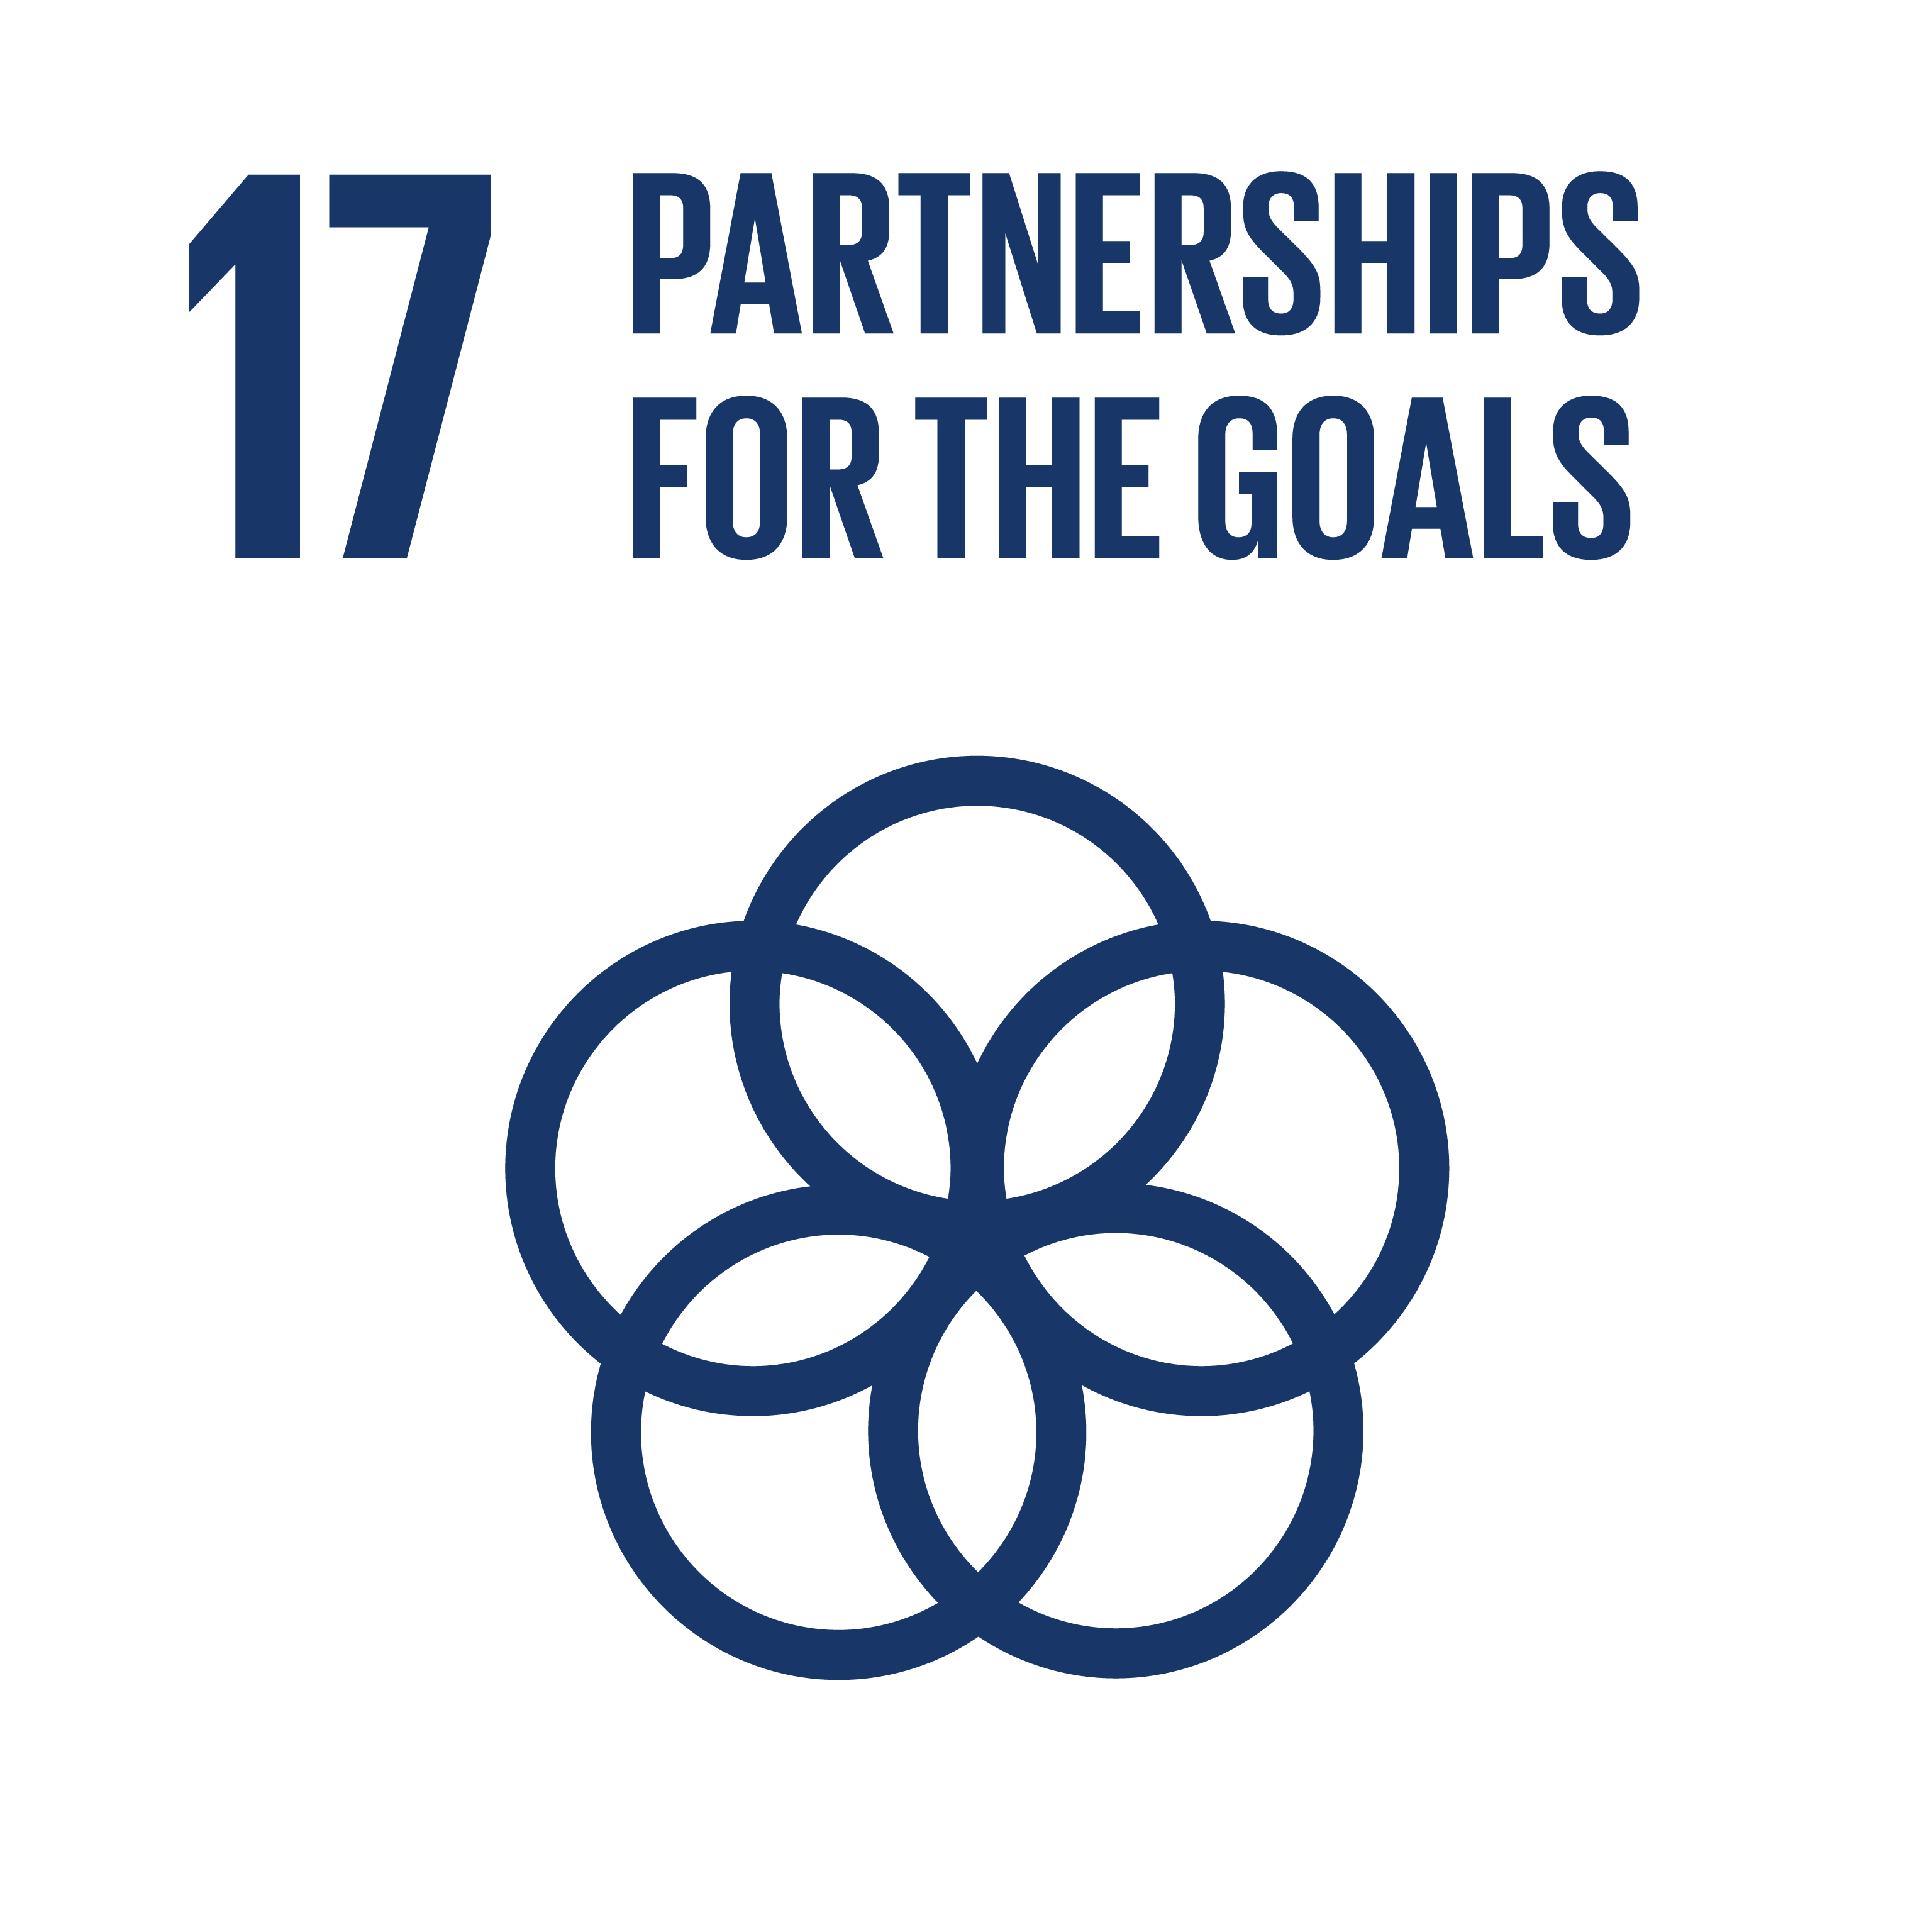 Strengthen the means of implementation and revitalize the Global Partnership for Sustainable Development 